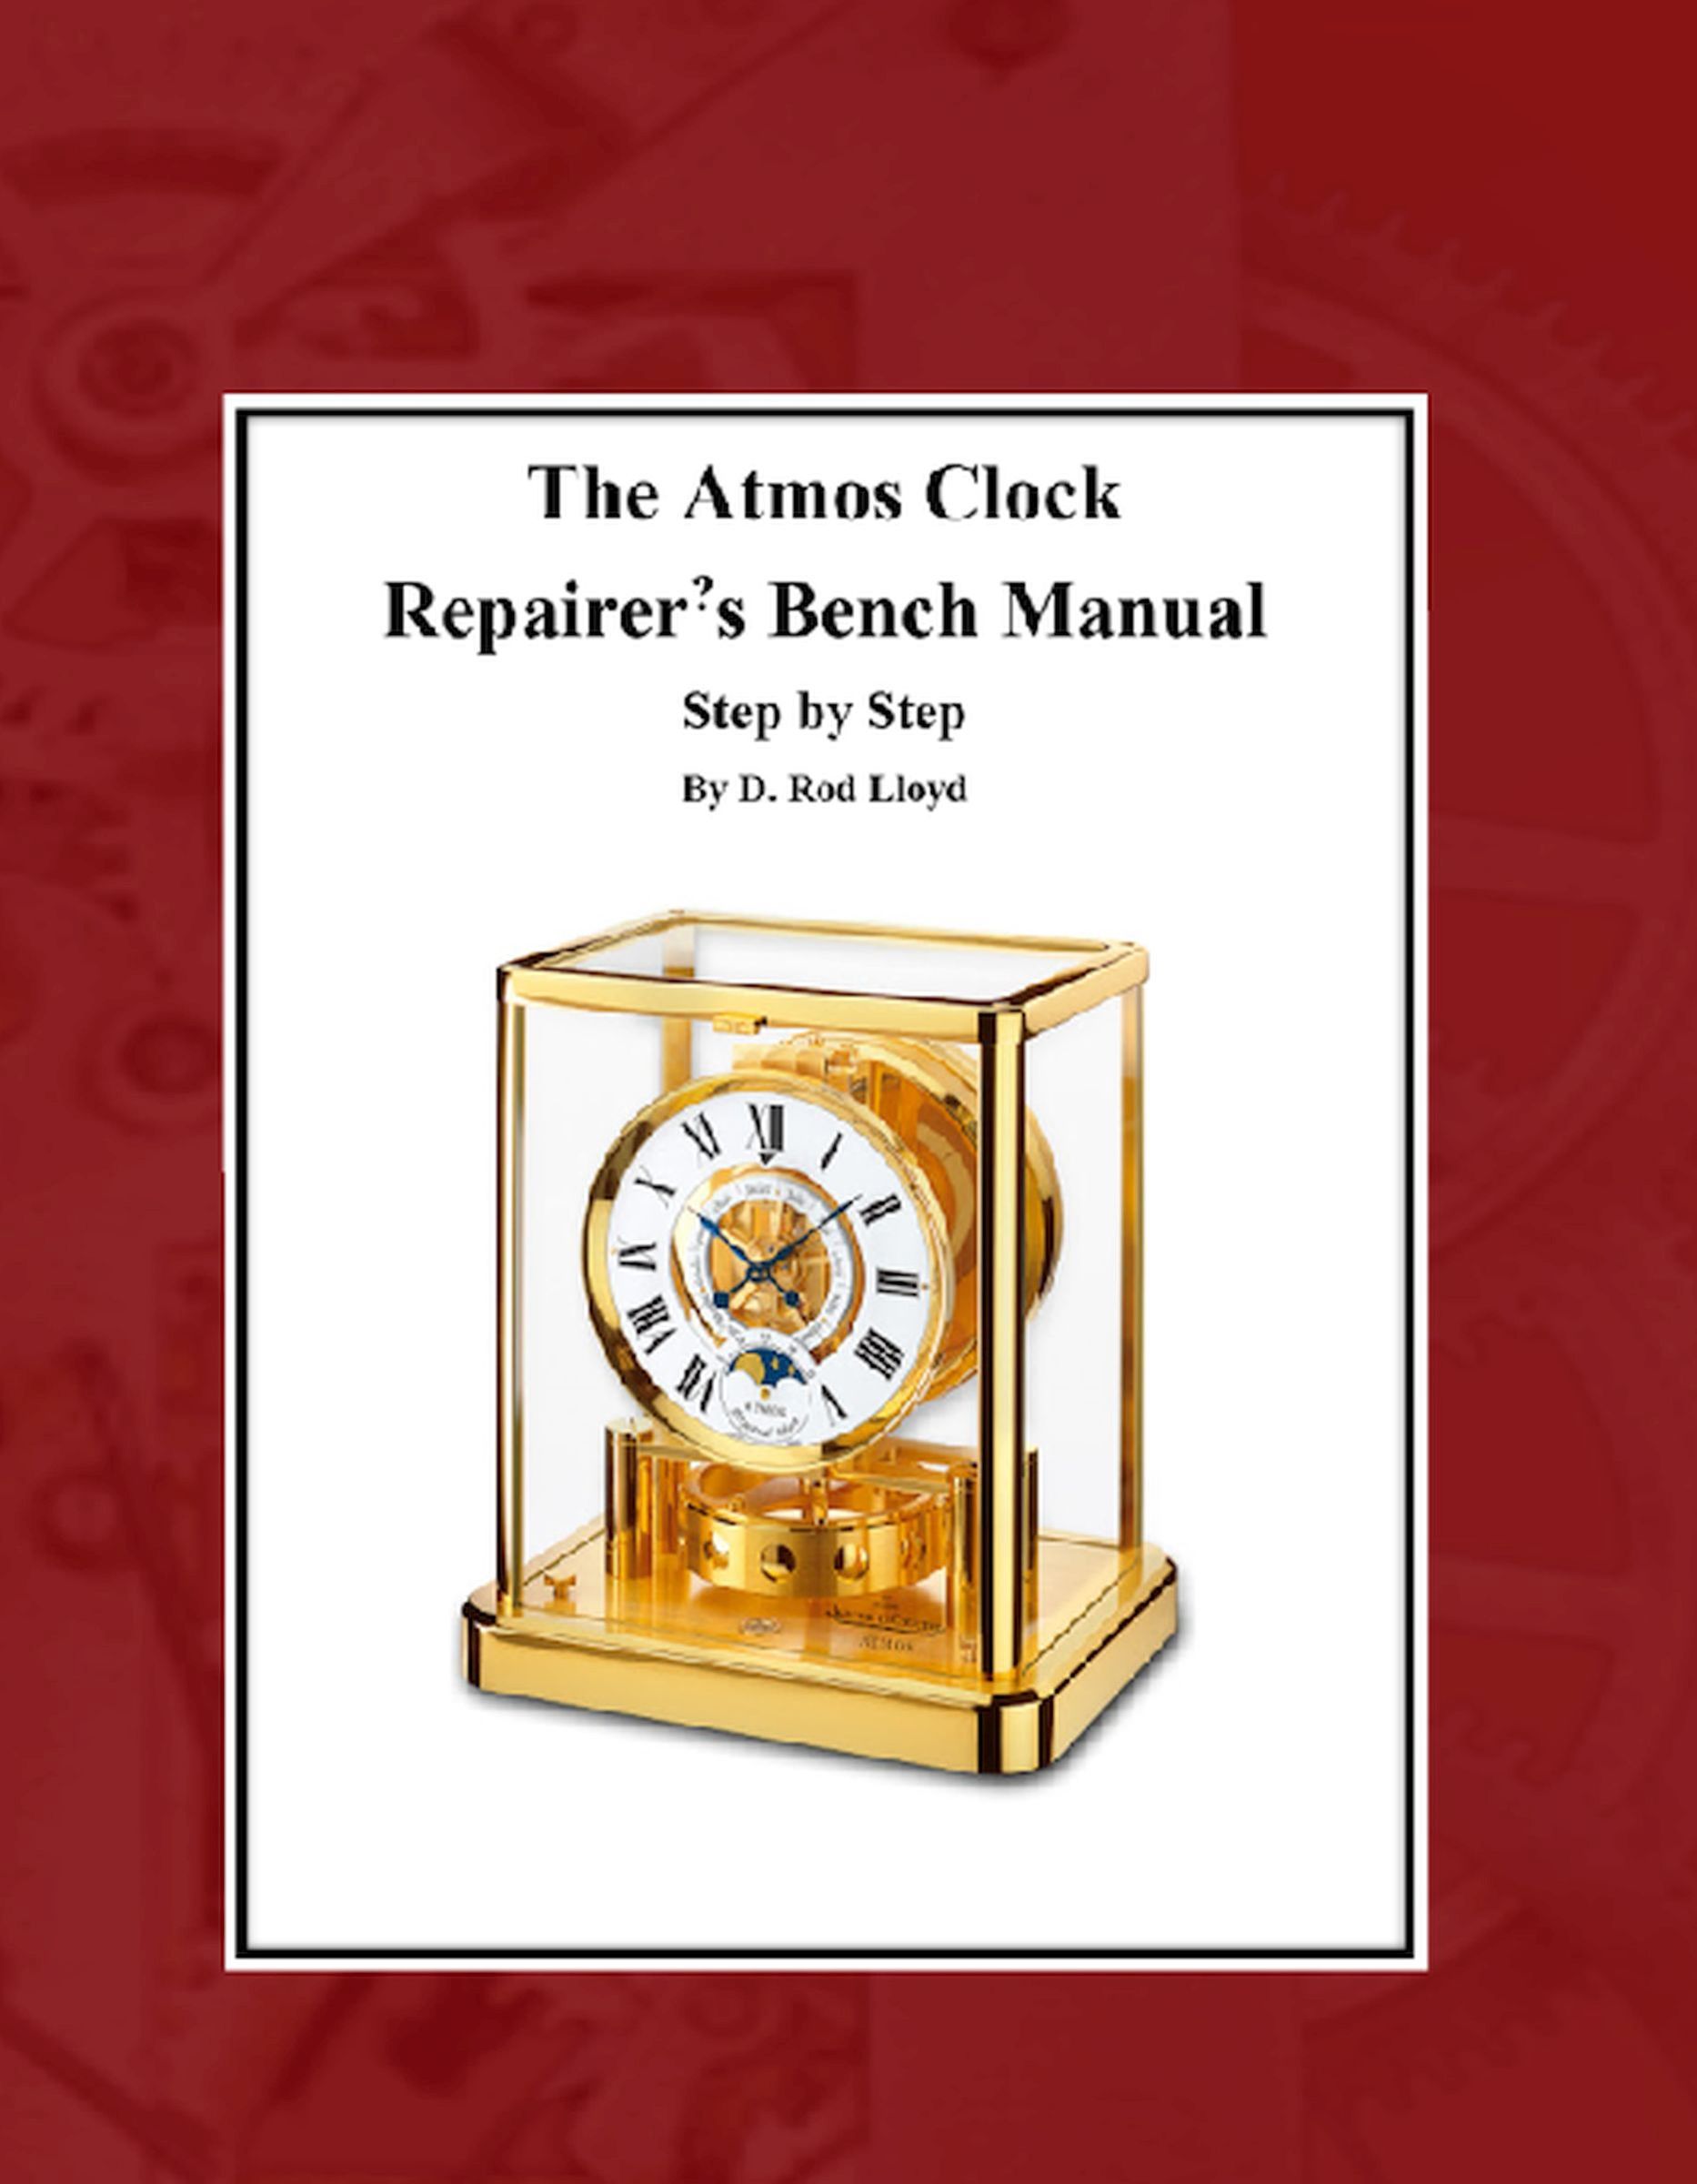 The Atmos Clock Repairers Bench Manual